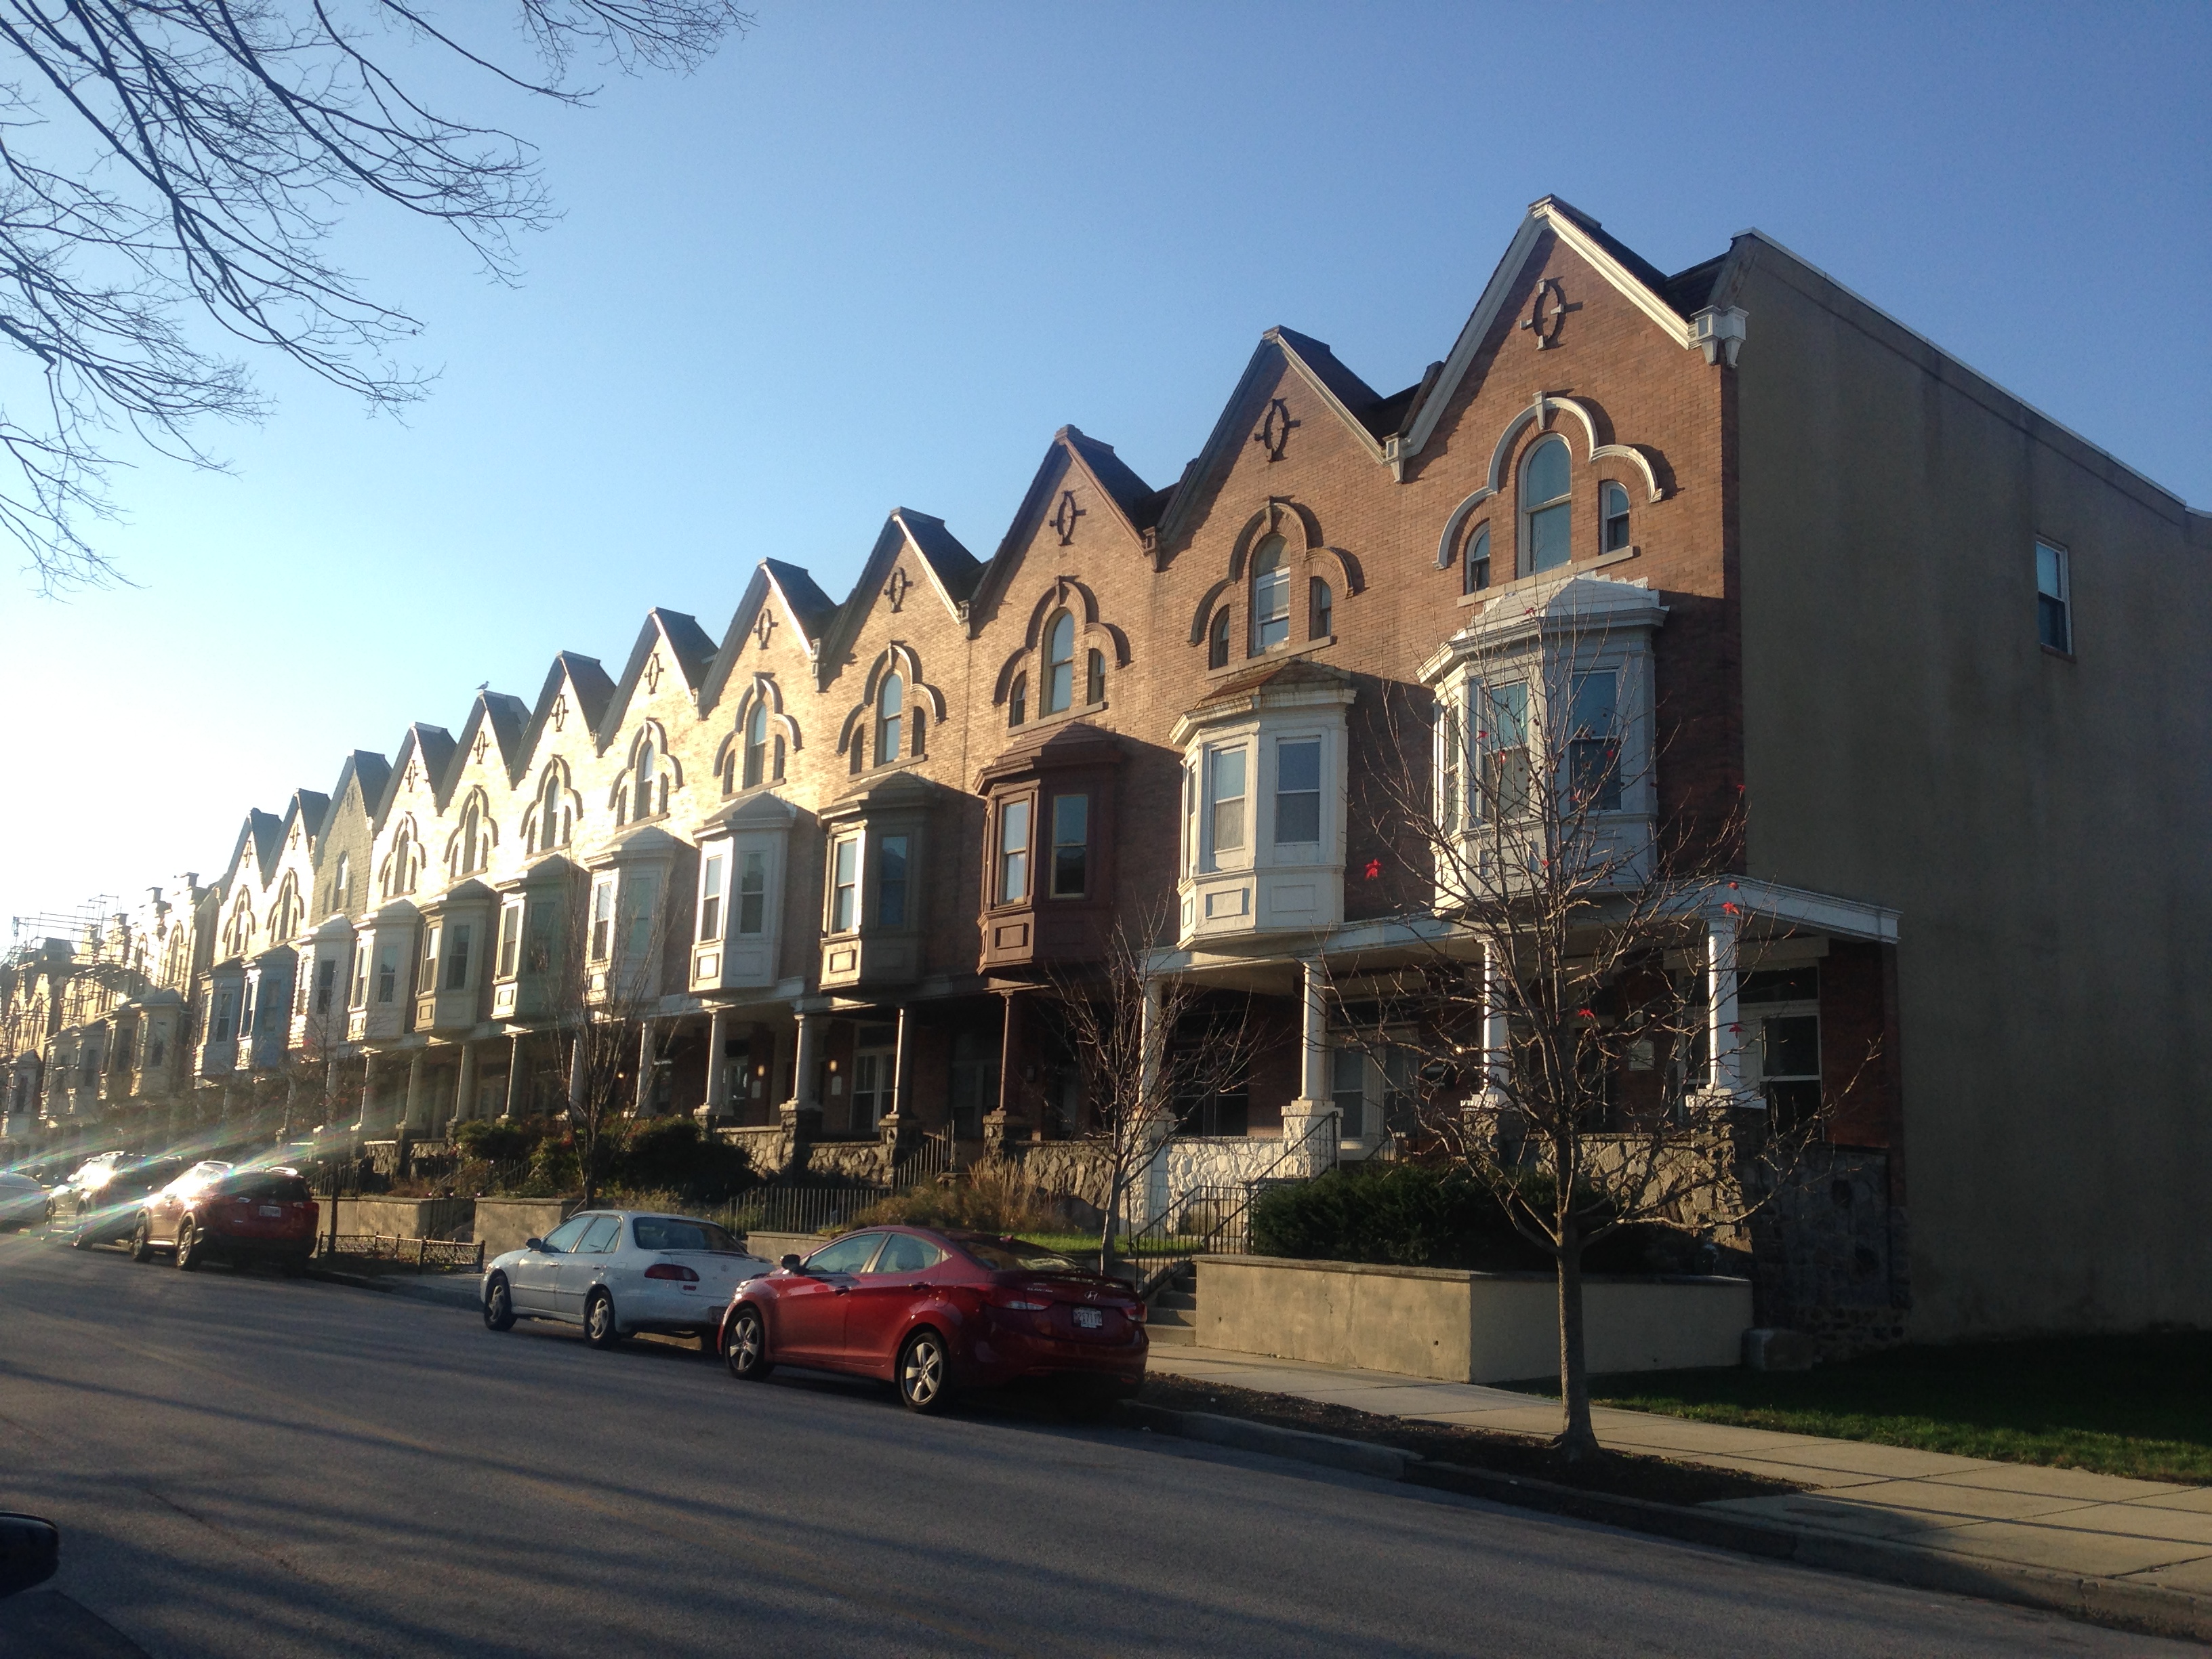 Image of rowhomes in Charles Village